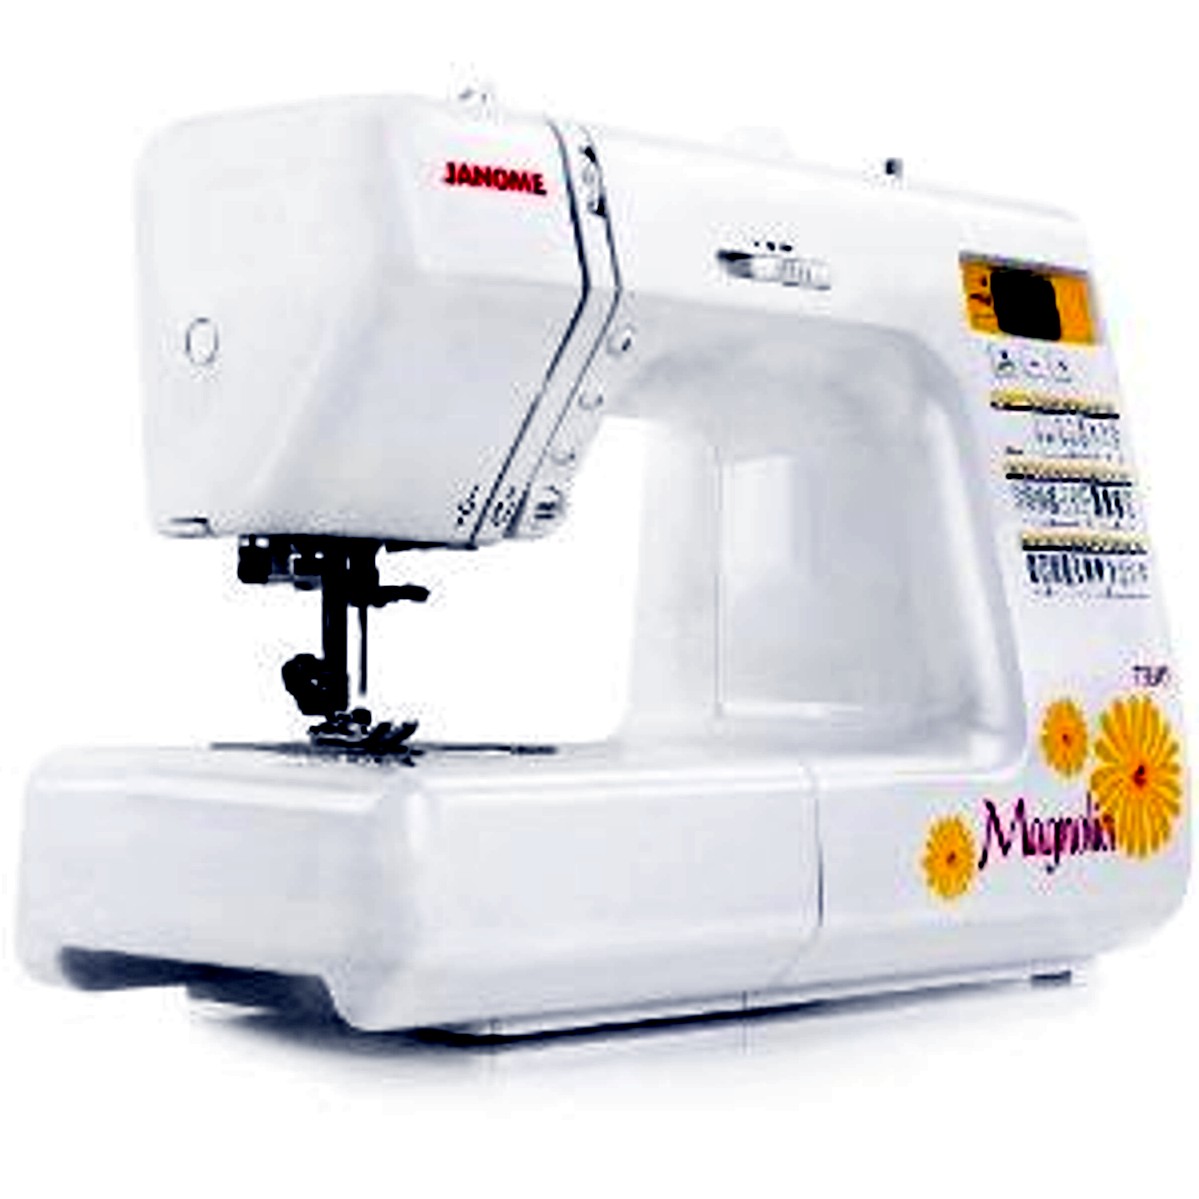 Janome Mod-200 Computerized Electric Sewing Machine & Reviews